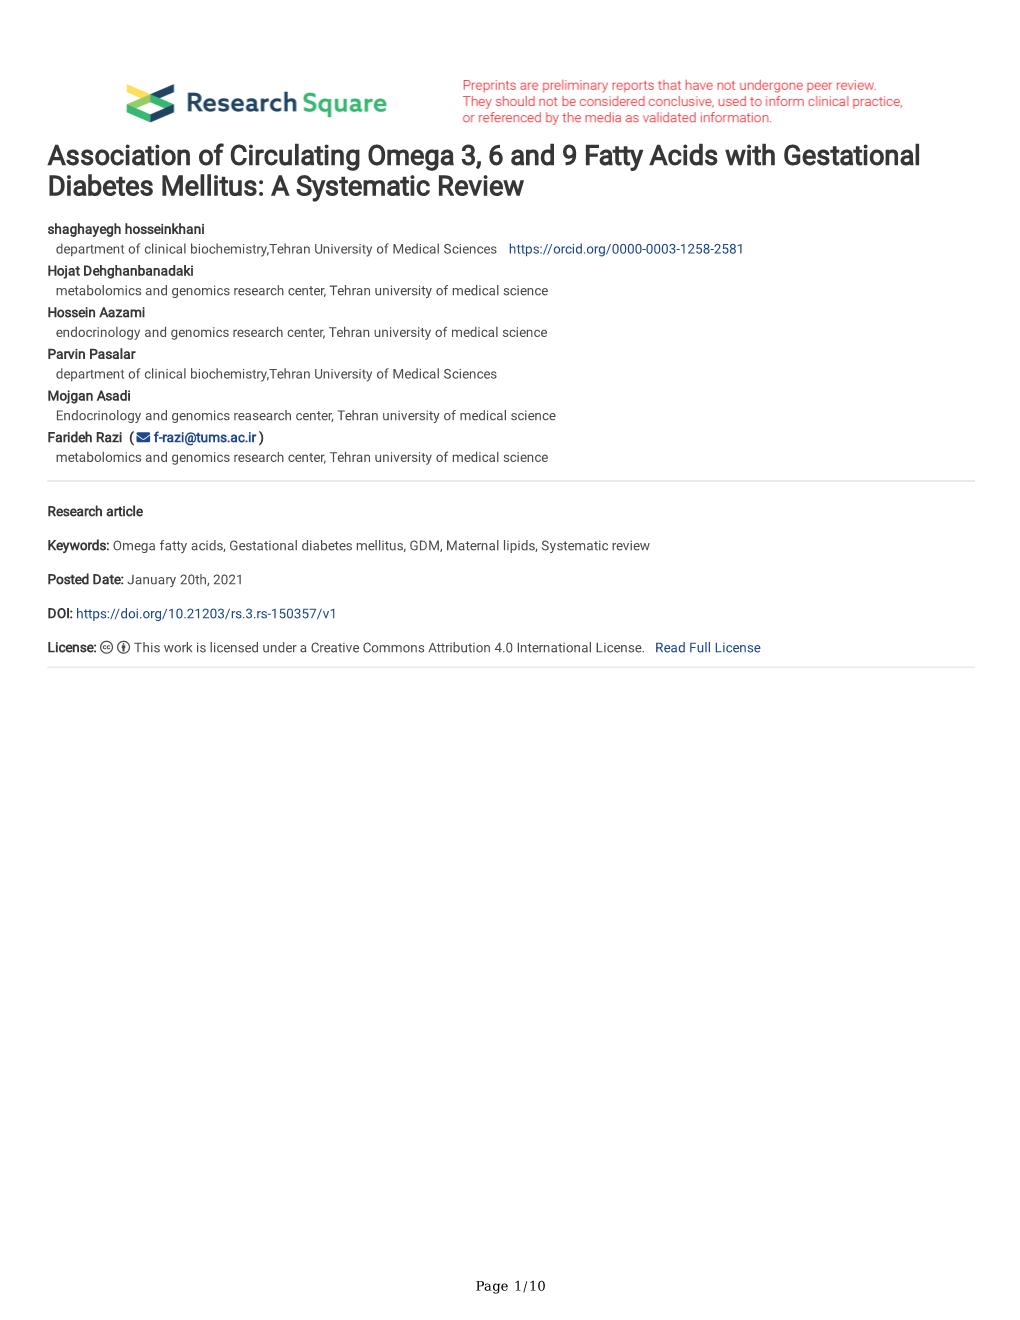 Association of Circulating Omega 3, 6 and 9 Fatty Acids with Gestational